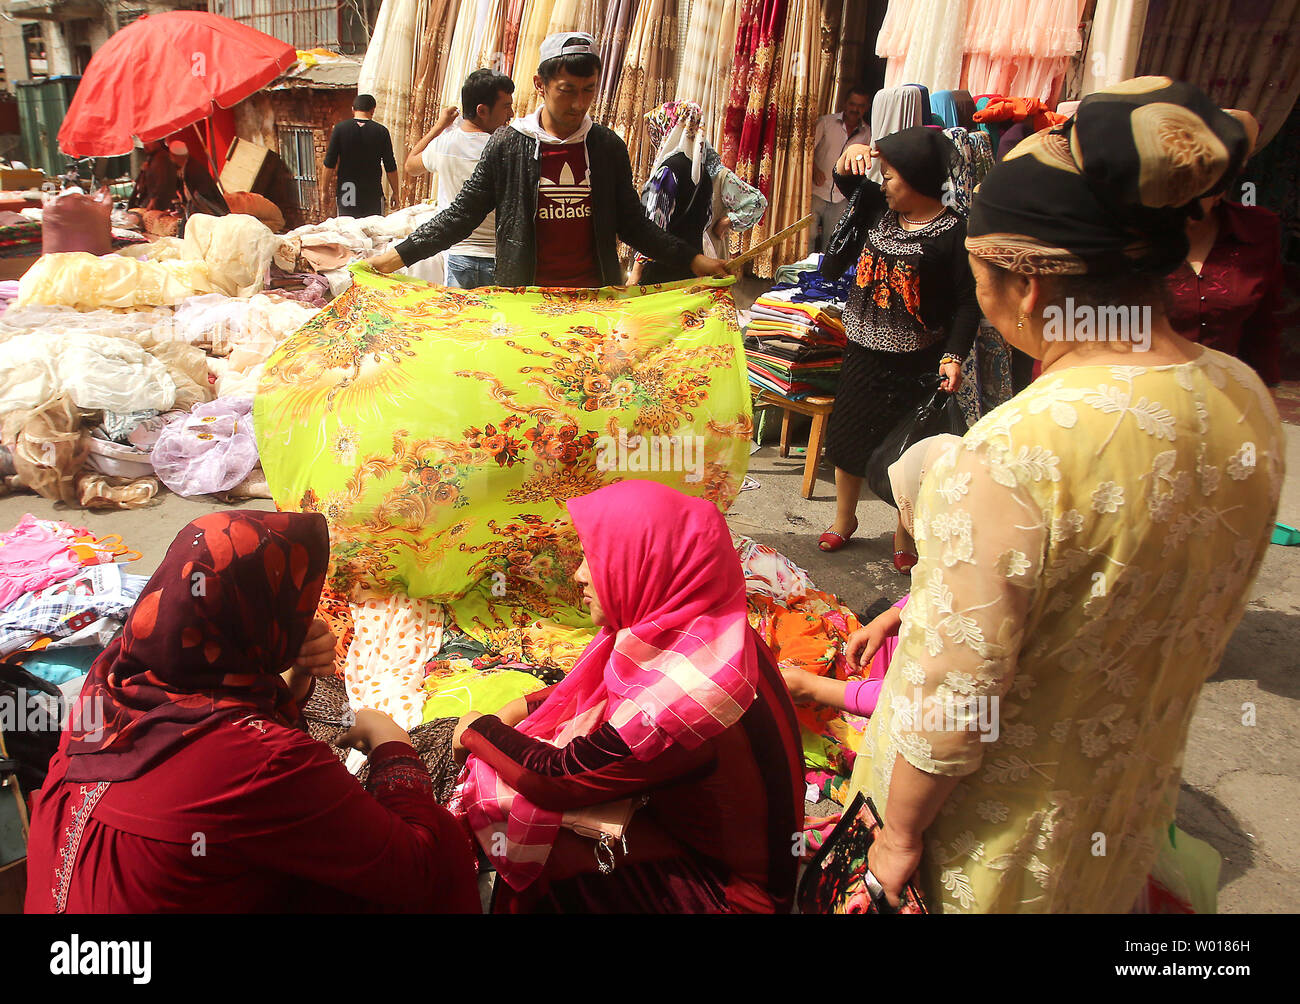 Muslim Uygurs and Kazakhs shop at a fabric market during Ramadan in what many consider the Muslim capital of China, Urumqi, the capital of China's predominantly Muslim and restive Xinjiang Province, on June 29, 2015.  Urumqi has been the sight of several bloody riots between the Chinese Han and the Muslim Uygurs, prompting government officials to restrict movements and communications within the city, as well as travel outside the province.       Photo by Stephen Shaver/UPI Stock Photo